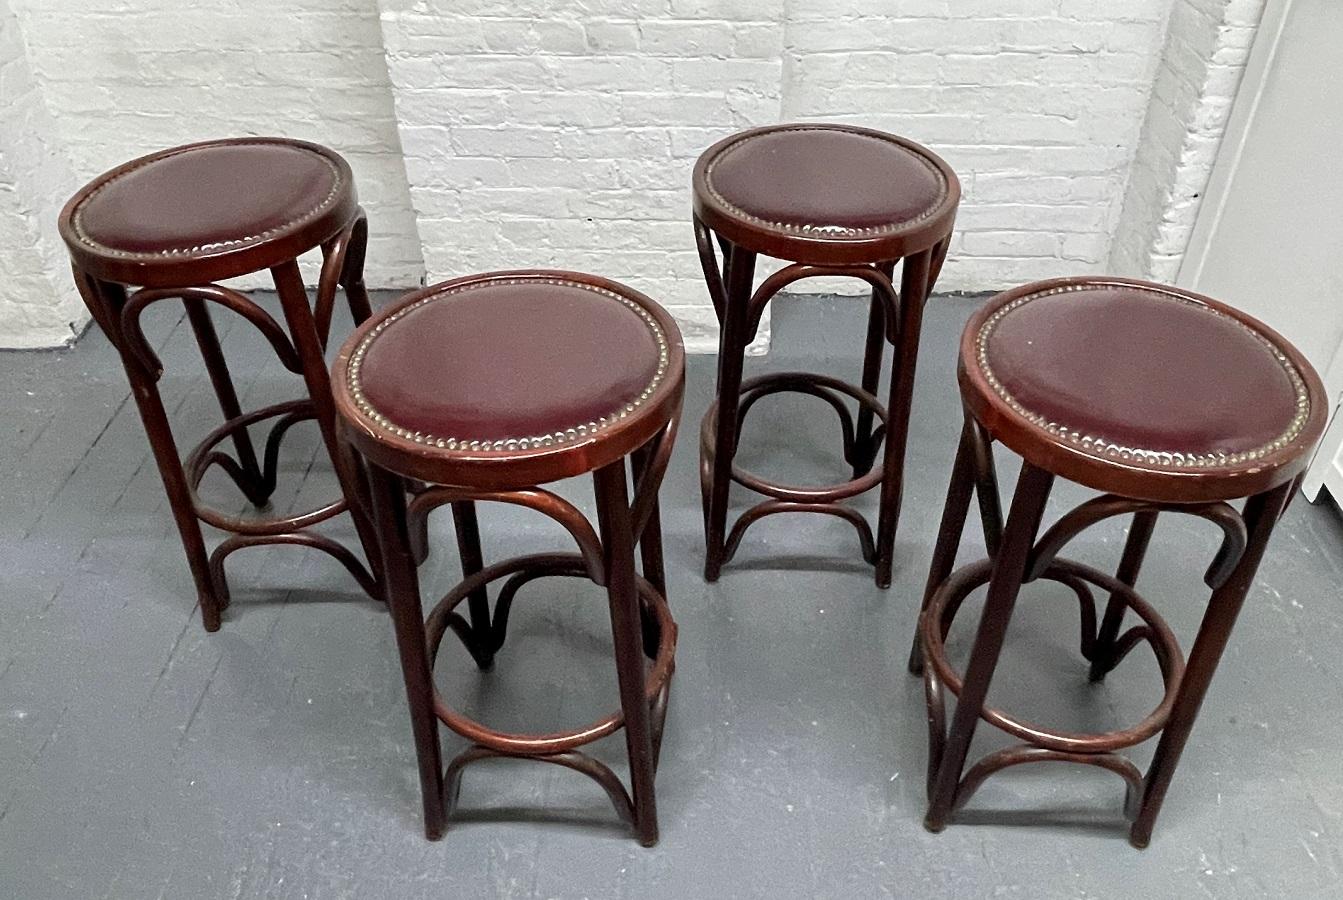 Set of four Thonet style bentwood stools. The stools have original vinyl seats with brass tacks. The frames of the stools are beech and are bentwood.